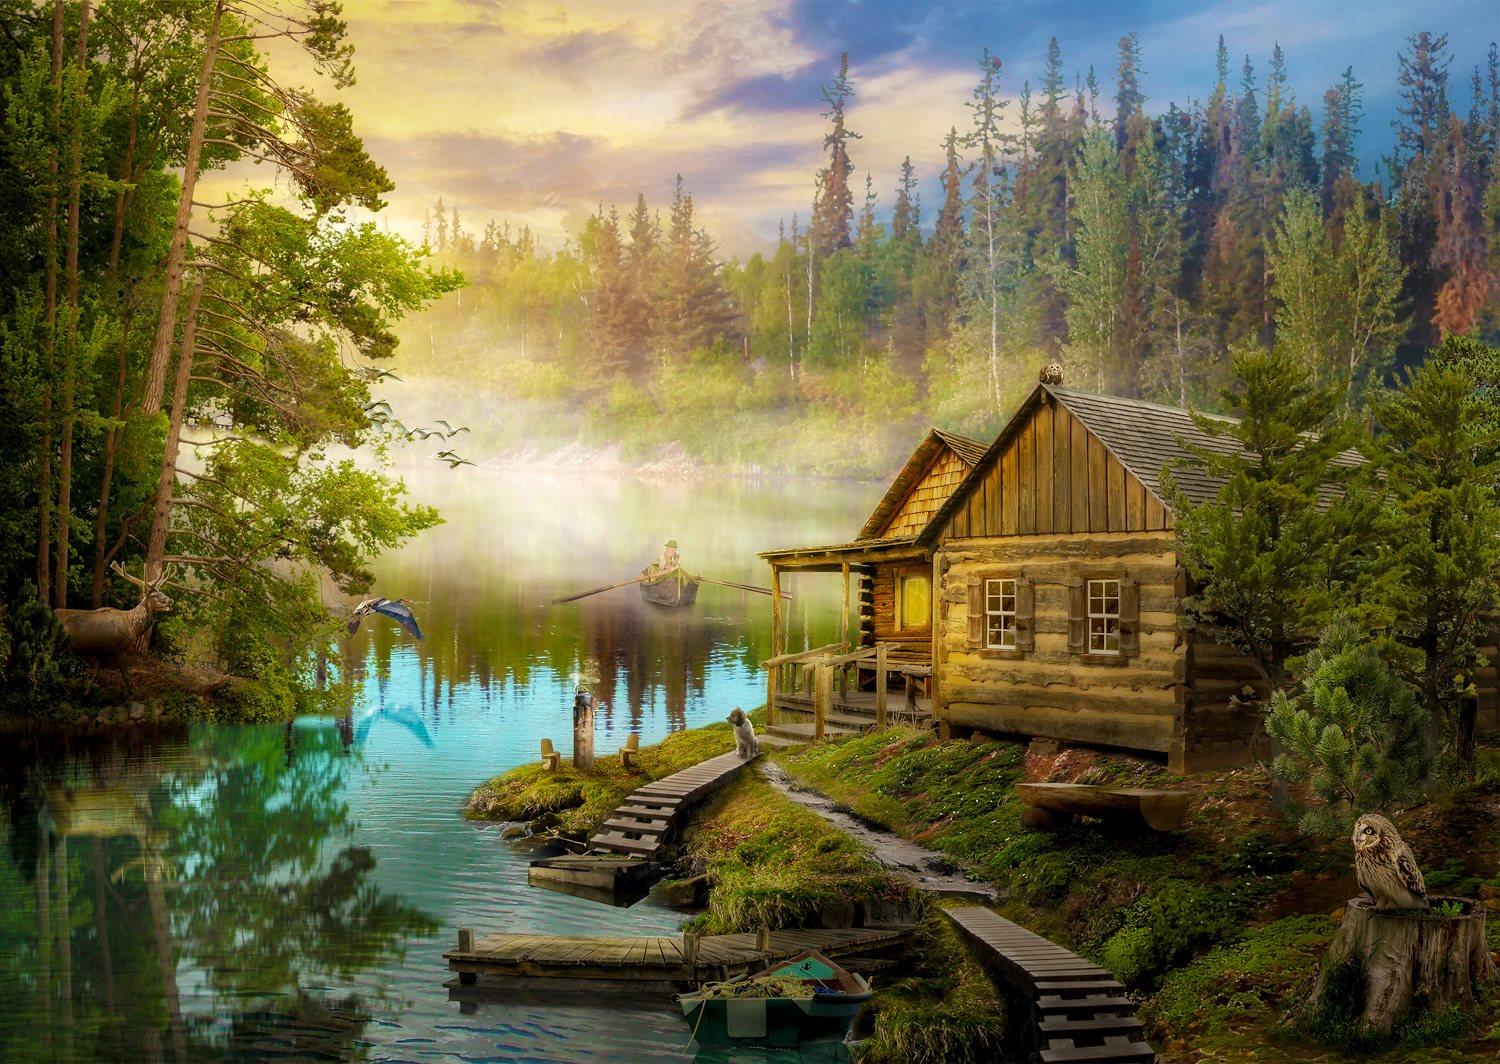 Enjoy A Log Cabin on the River Jigsaw Puzzle (1000 Pieces)